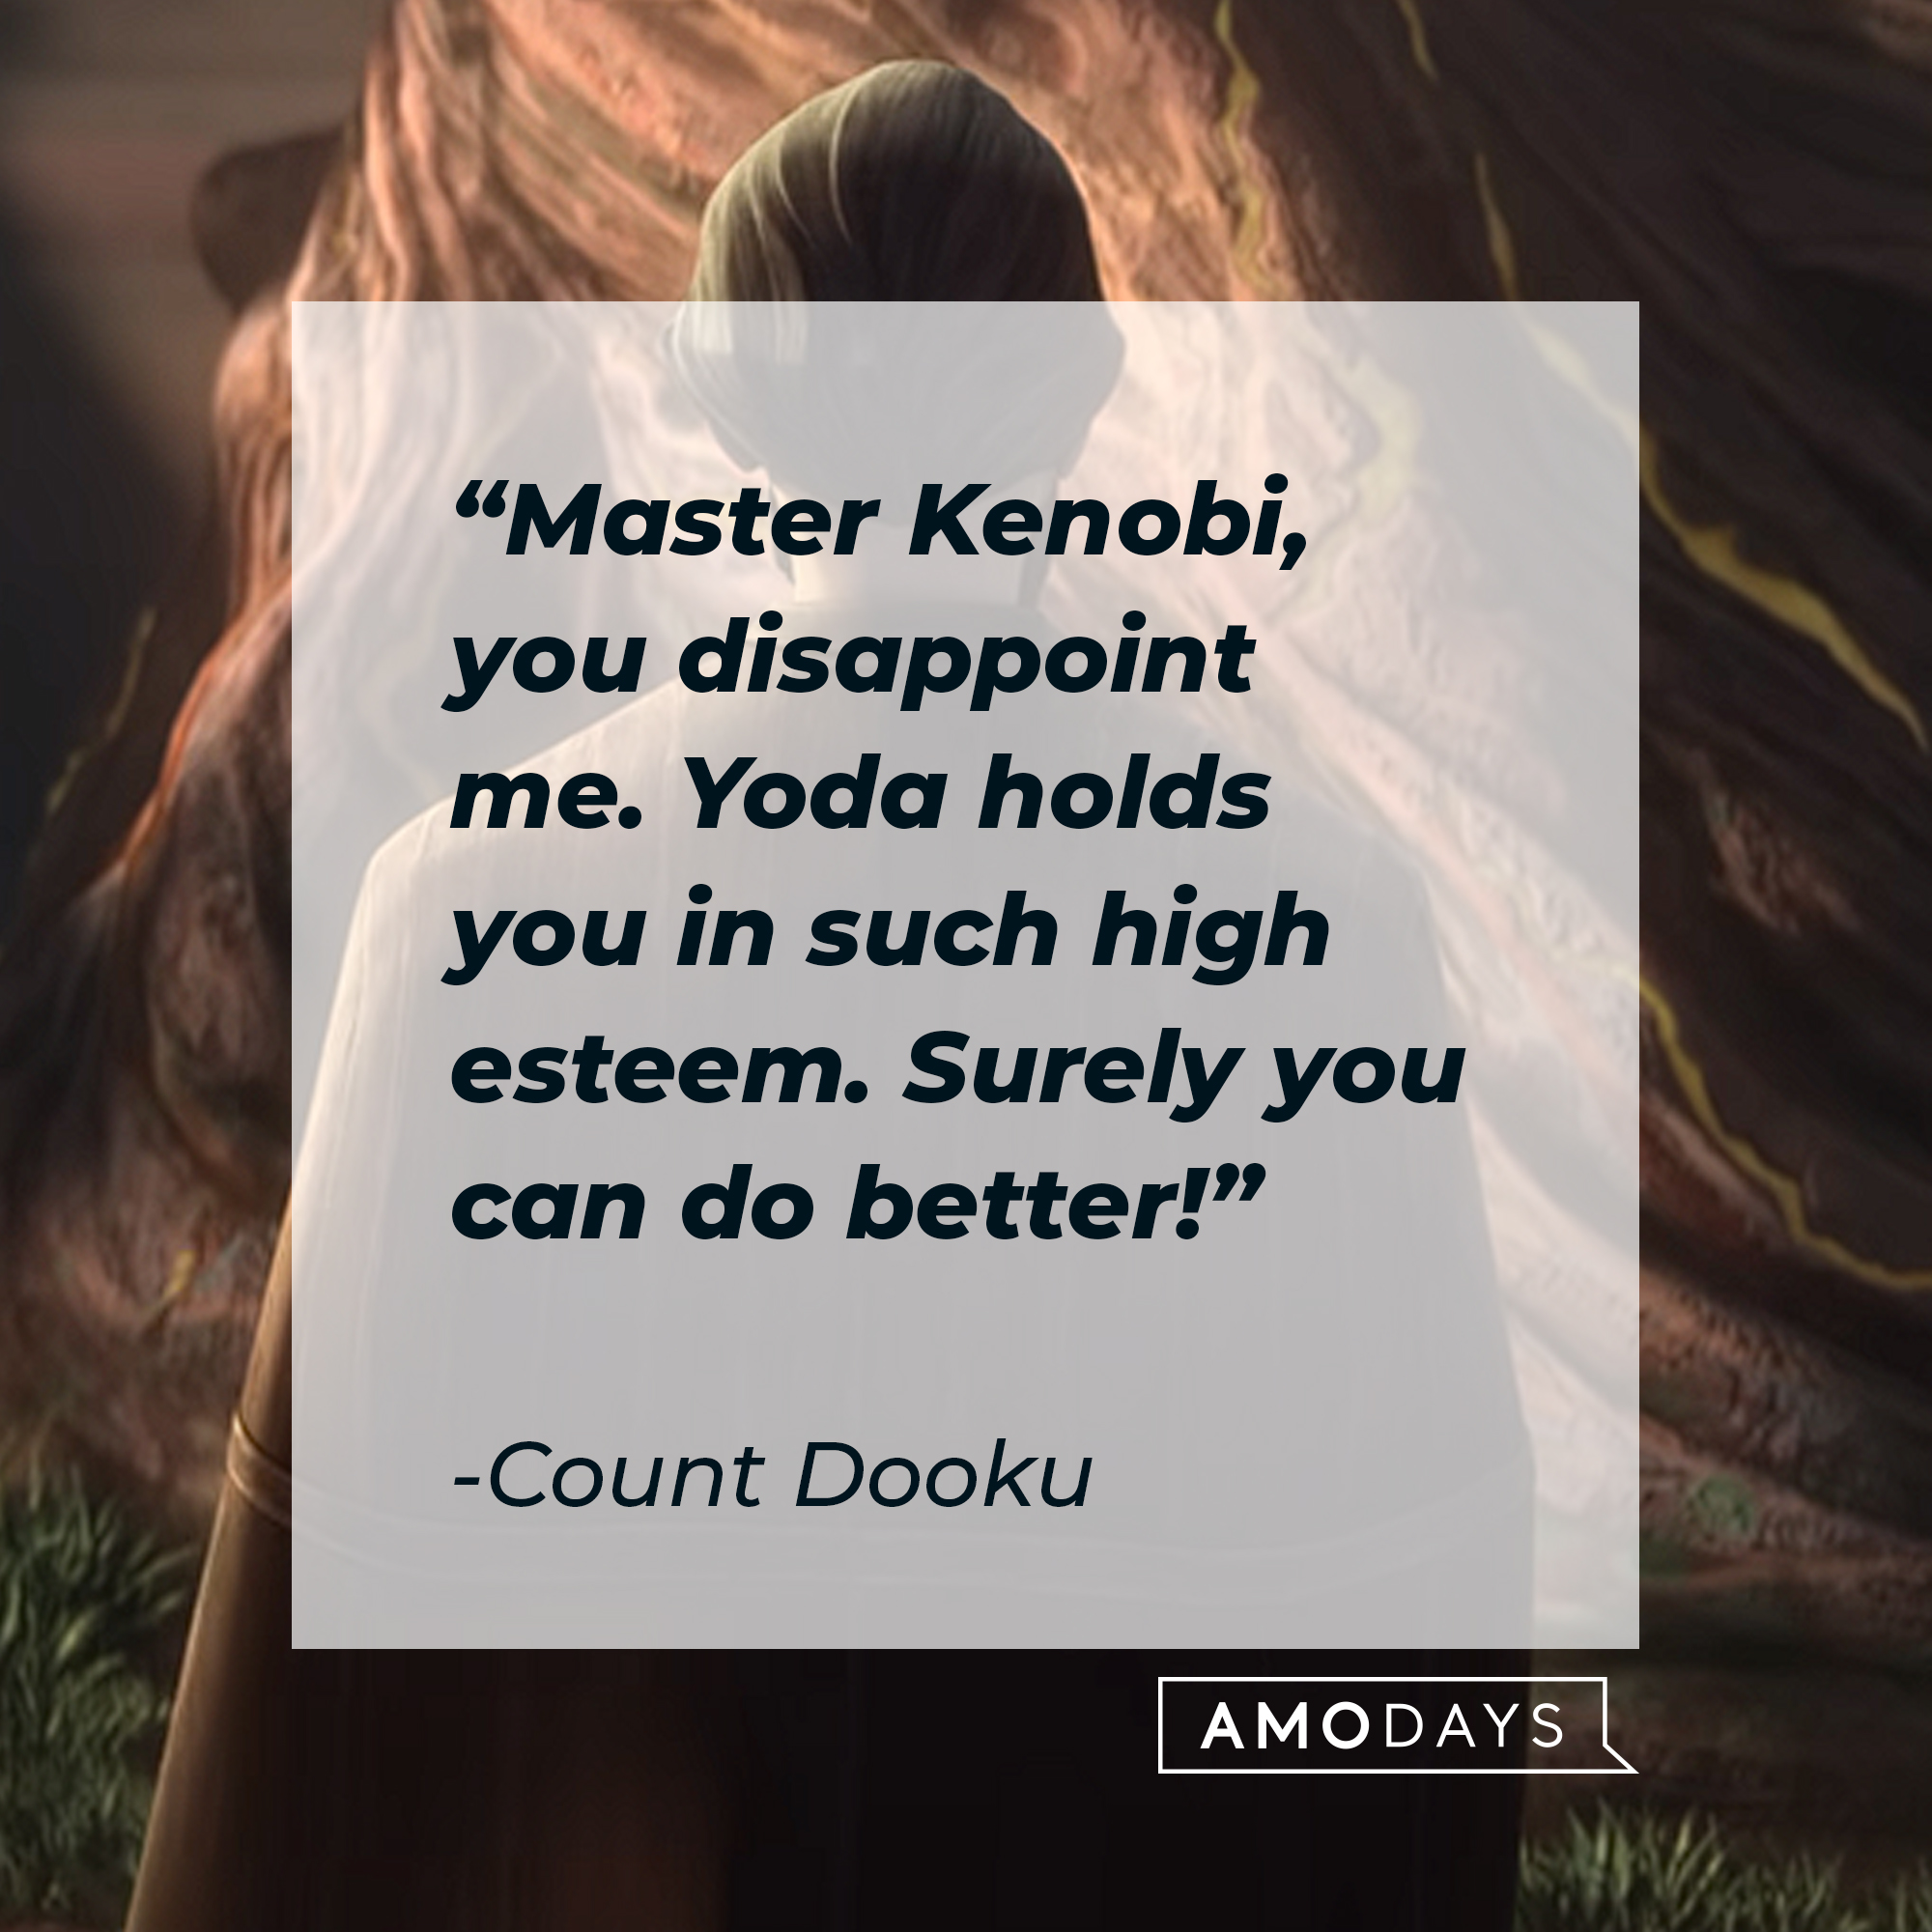 Count Dooku's quote: "Master Kenobi, you disappoint me. Yoda holds you in such high esteem. Surely you can do better!" | Source: youtube.com/StarWars